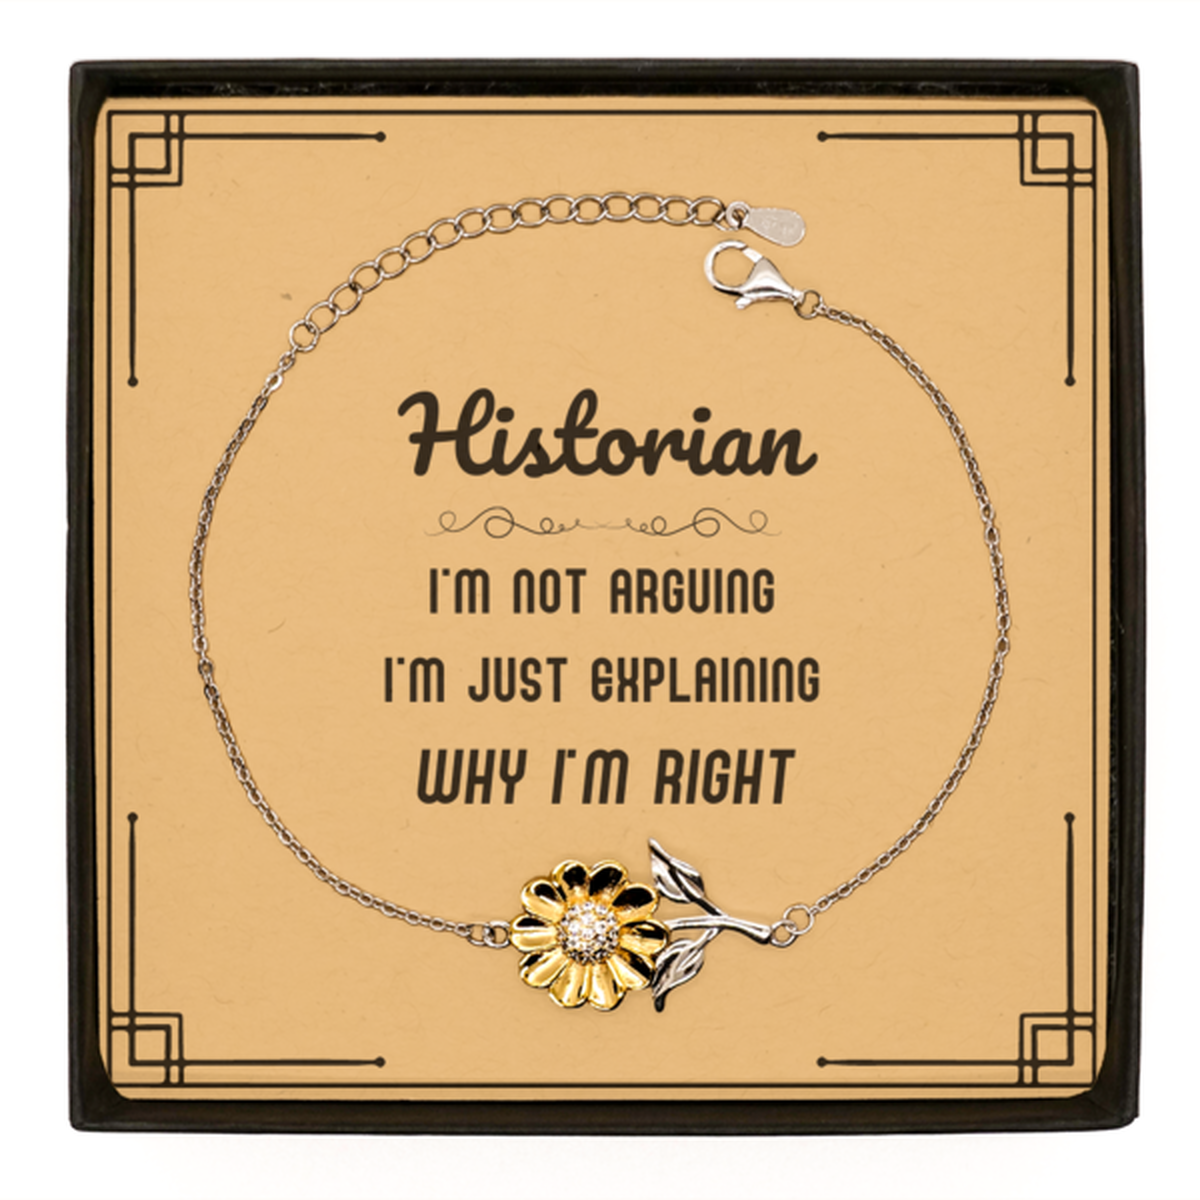 Historian I'm not Arguing. I'm Just Explaining Why I'm RIGHT Sunflower Bracelet, Funny Saying Quote Historian Gifts For Historian Message Card Graduation Birthday Christmas Gifts for Men Women Coworker